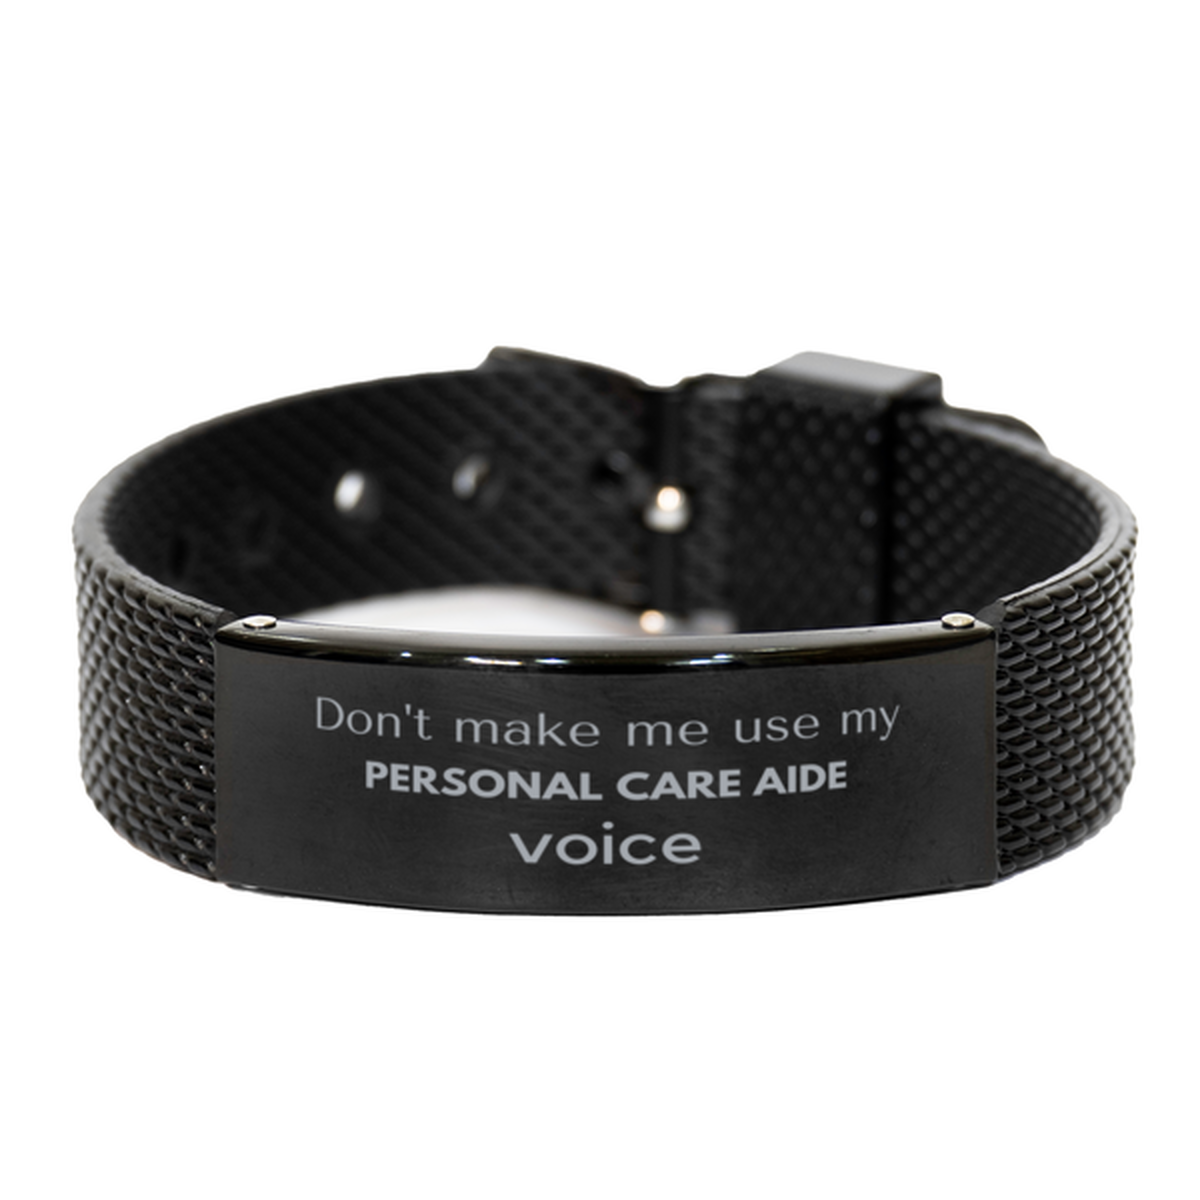 Don't make me use my Personal Care Aide voice, Sarcasm Personal Care Aide Gifts, Christmas Personal Care Aide Black Shark Mesh Bracelet Birthday Unique Gifts For Personal Care Aide Coworkers, Men, Women, Colleague, Friends